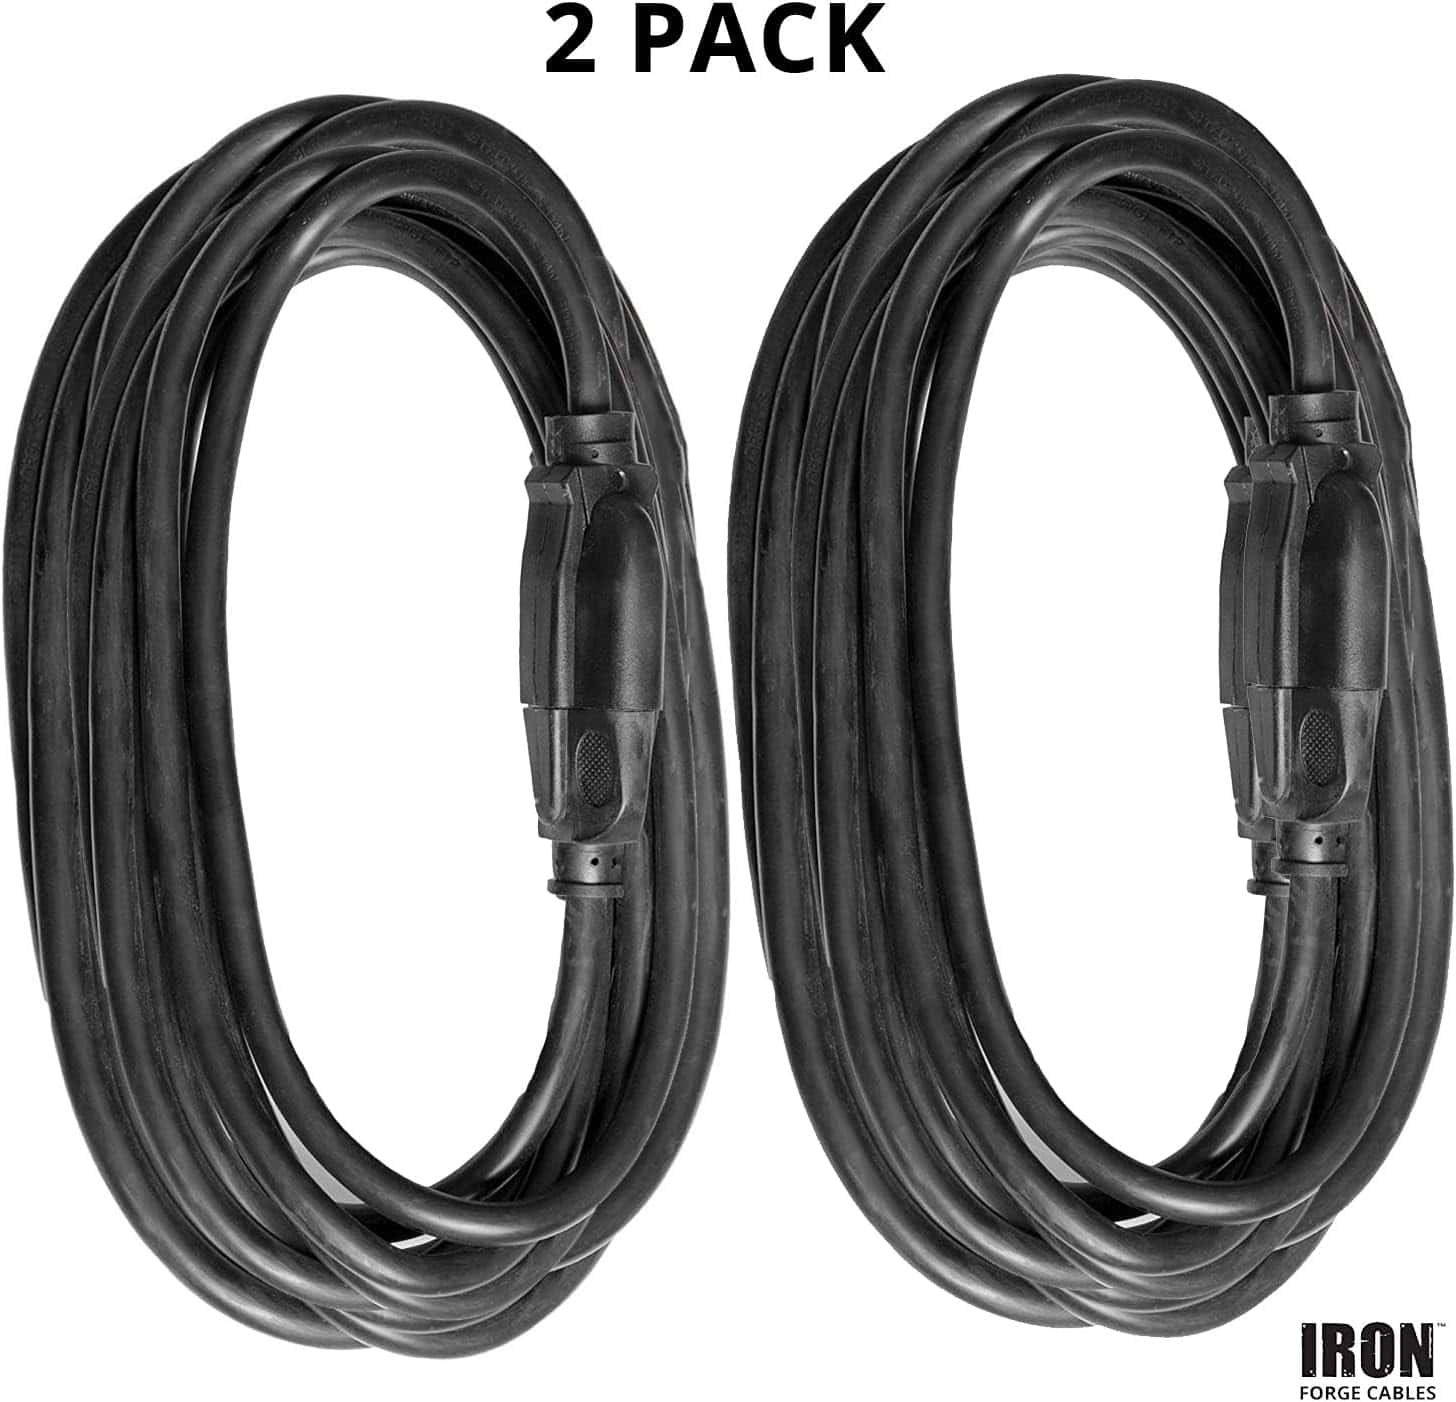 Iron Forge Cable 2 Pack 25 Ft Extension Cord, 1 63 Black 25 Foot Extension Cord Indoor Outdoor Use, 3 Prong Multipack Weatherproof Extension Cord Gr 2